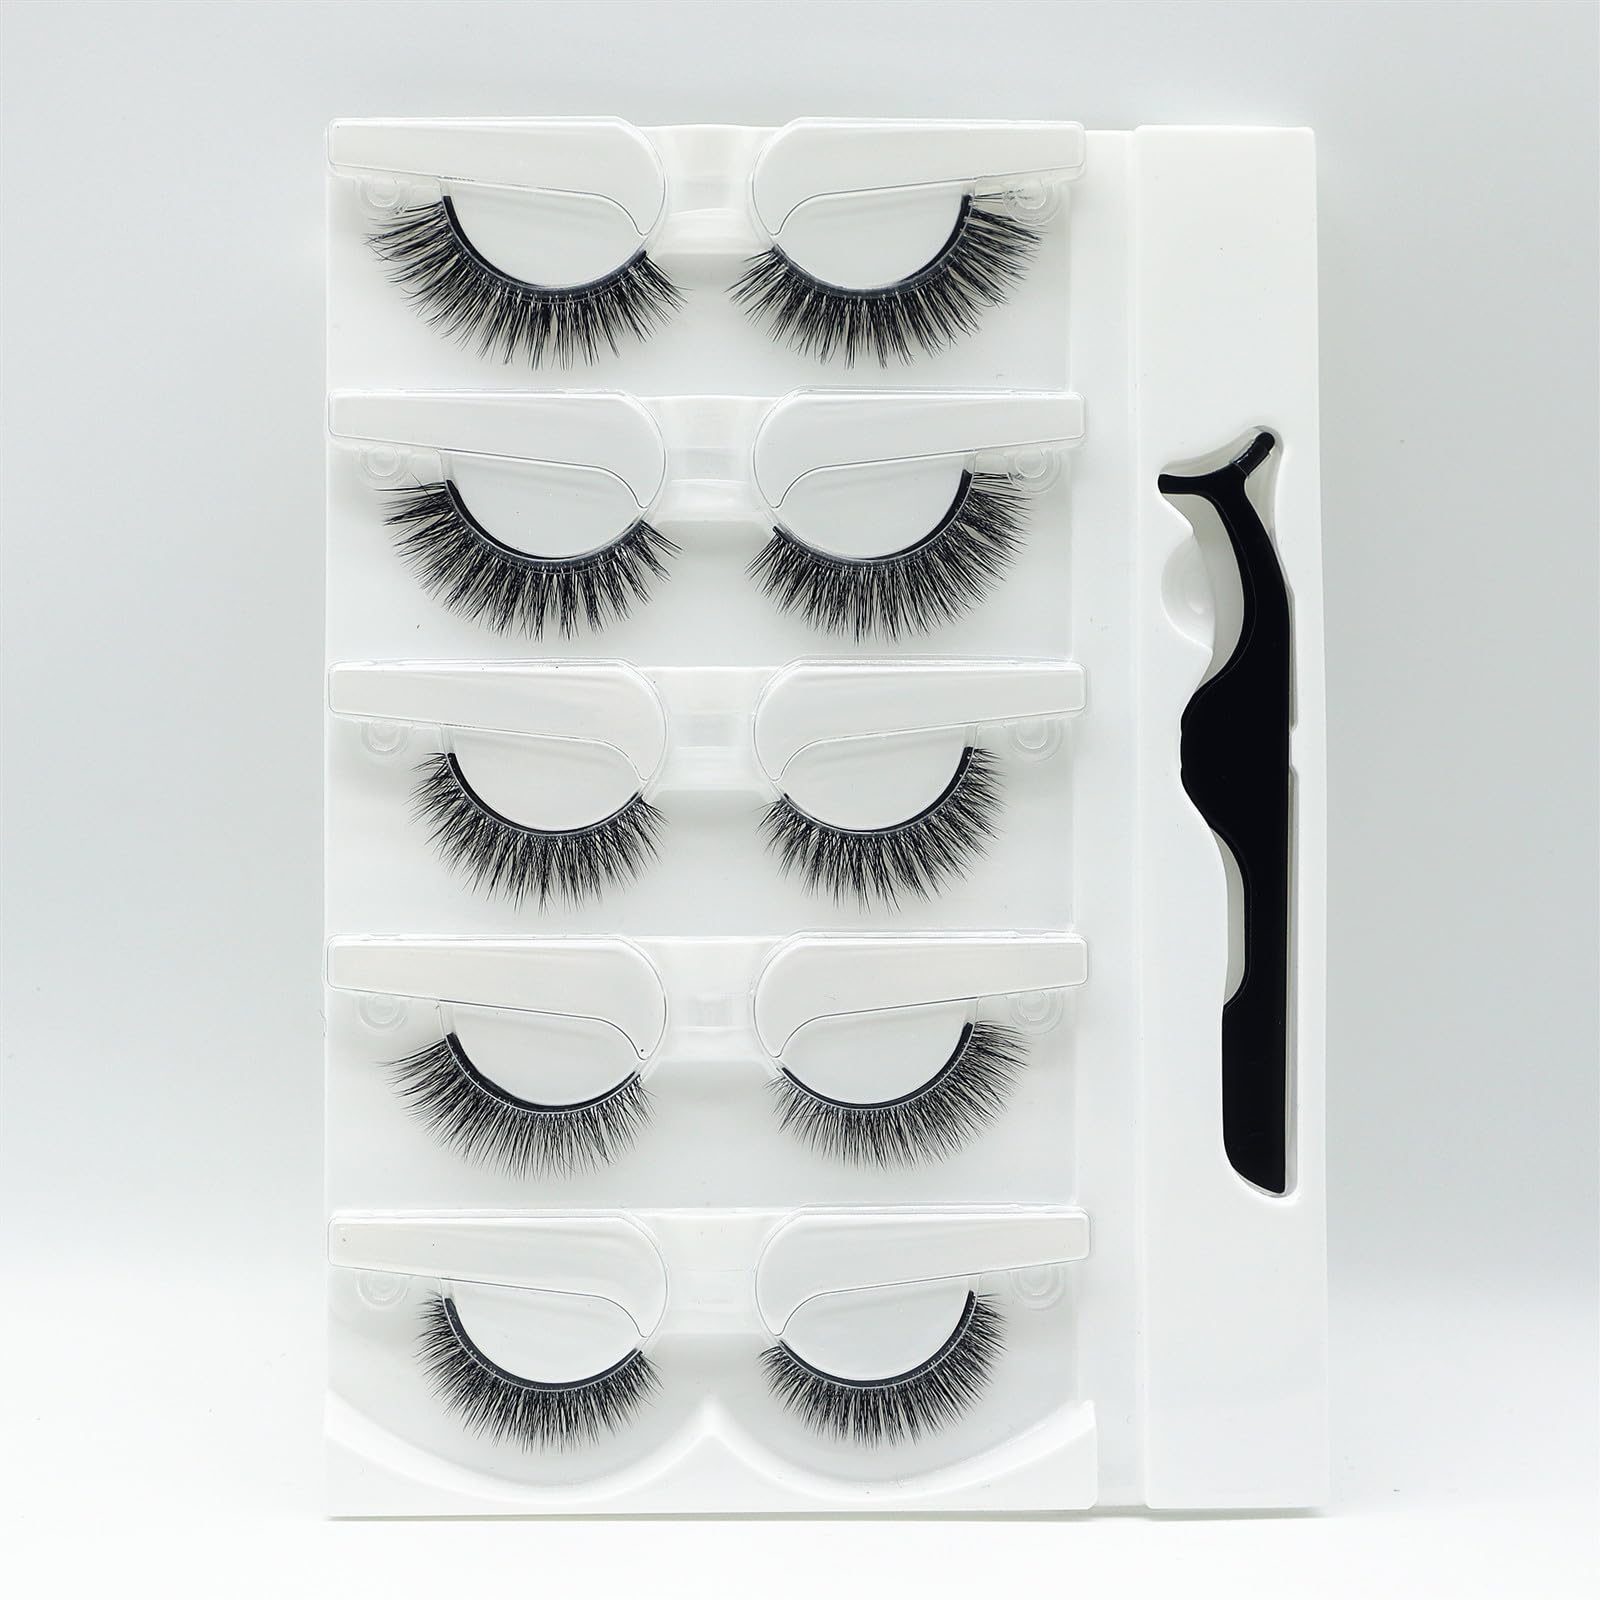 Reusable Self Adhesive Eyelashes No Glue or Eyeliner Needed, Easy To Apply, Stable/Non-slip False Lashes, Natural Look (5 Pairs)